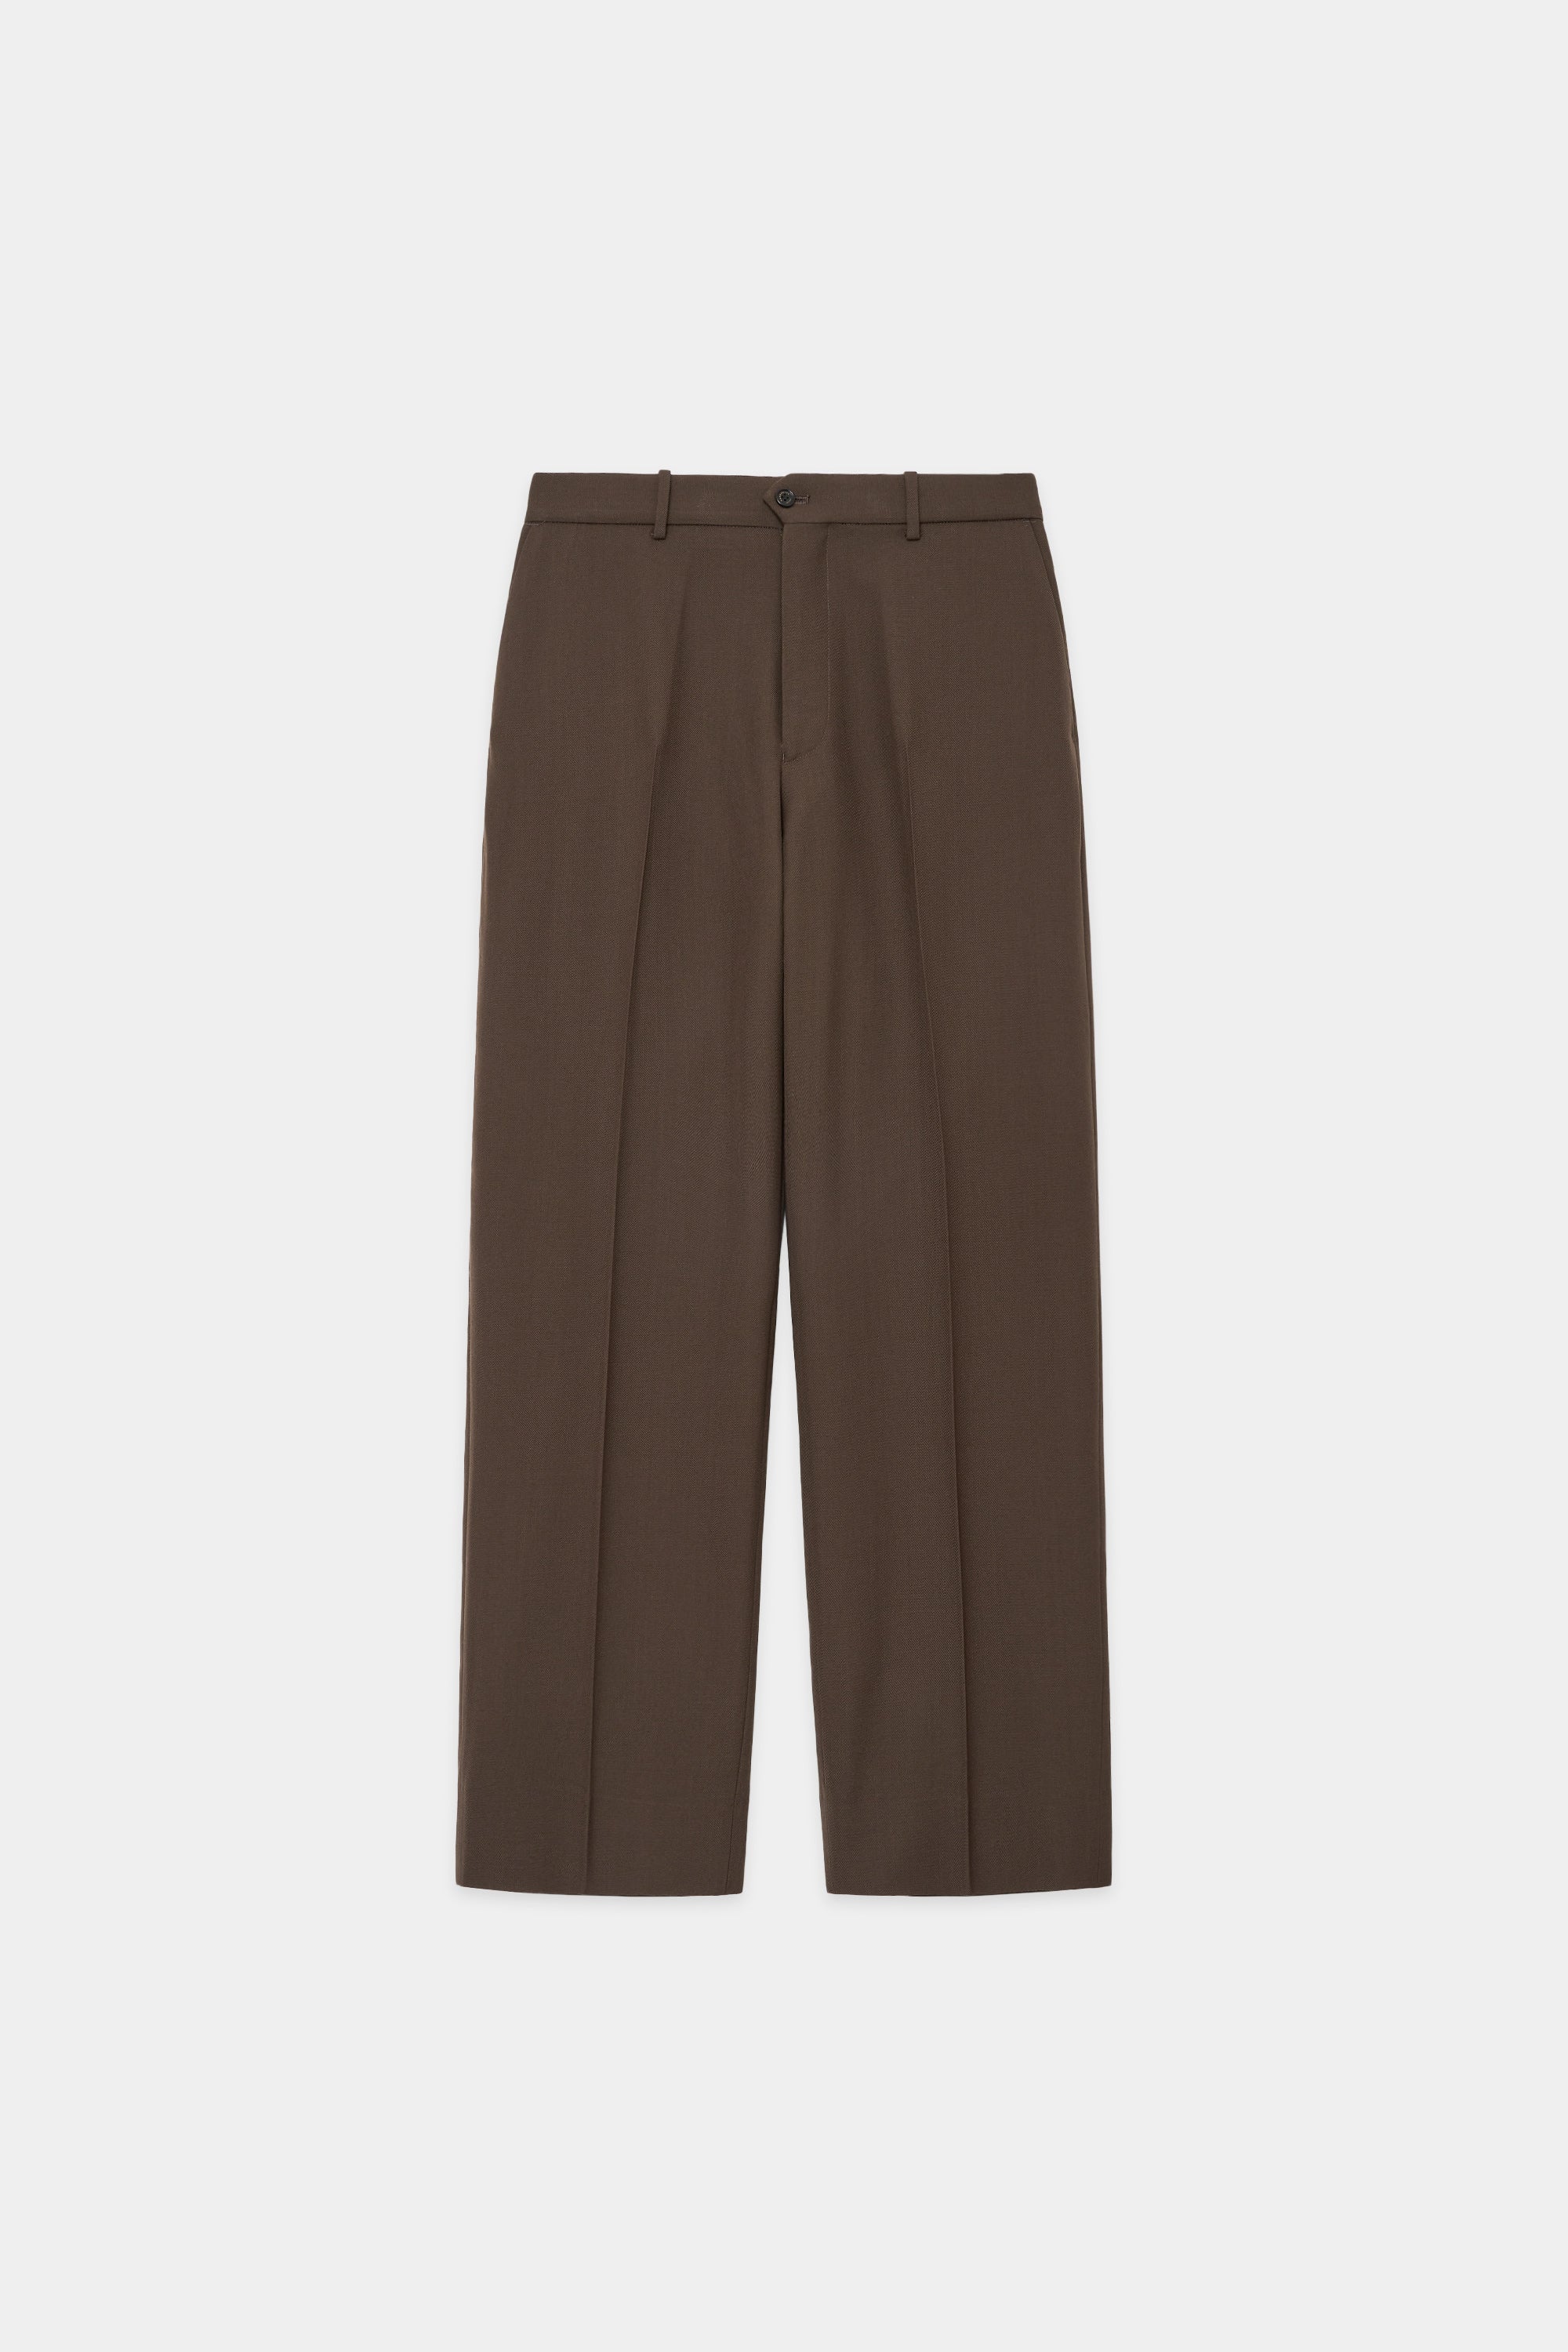 ORGANIC WOOL SURVIVAL CLOTH FLAT FRONT TROUSERS, Brown Khaki